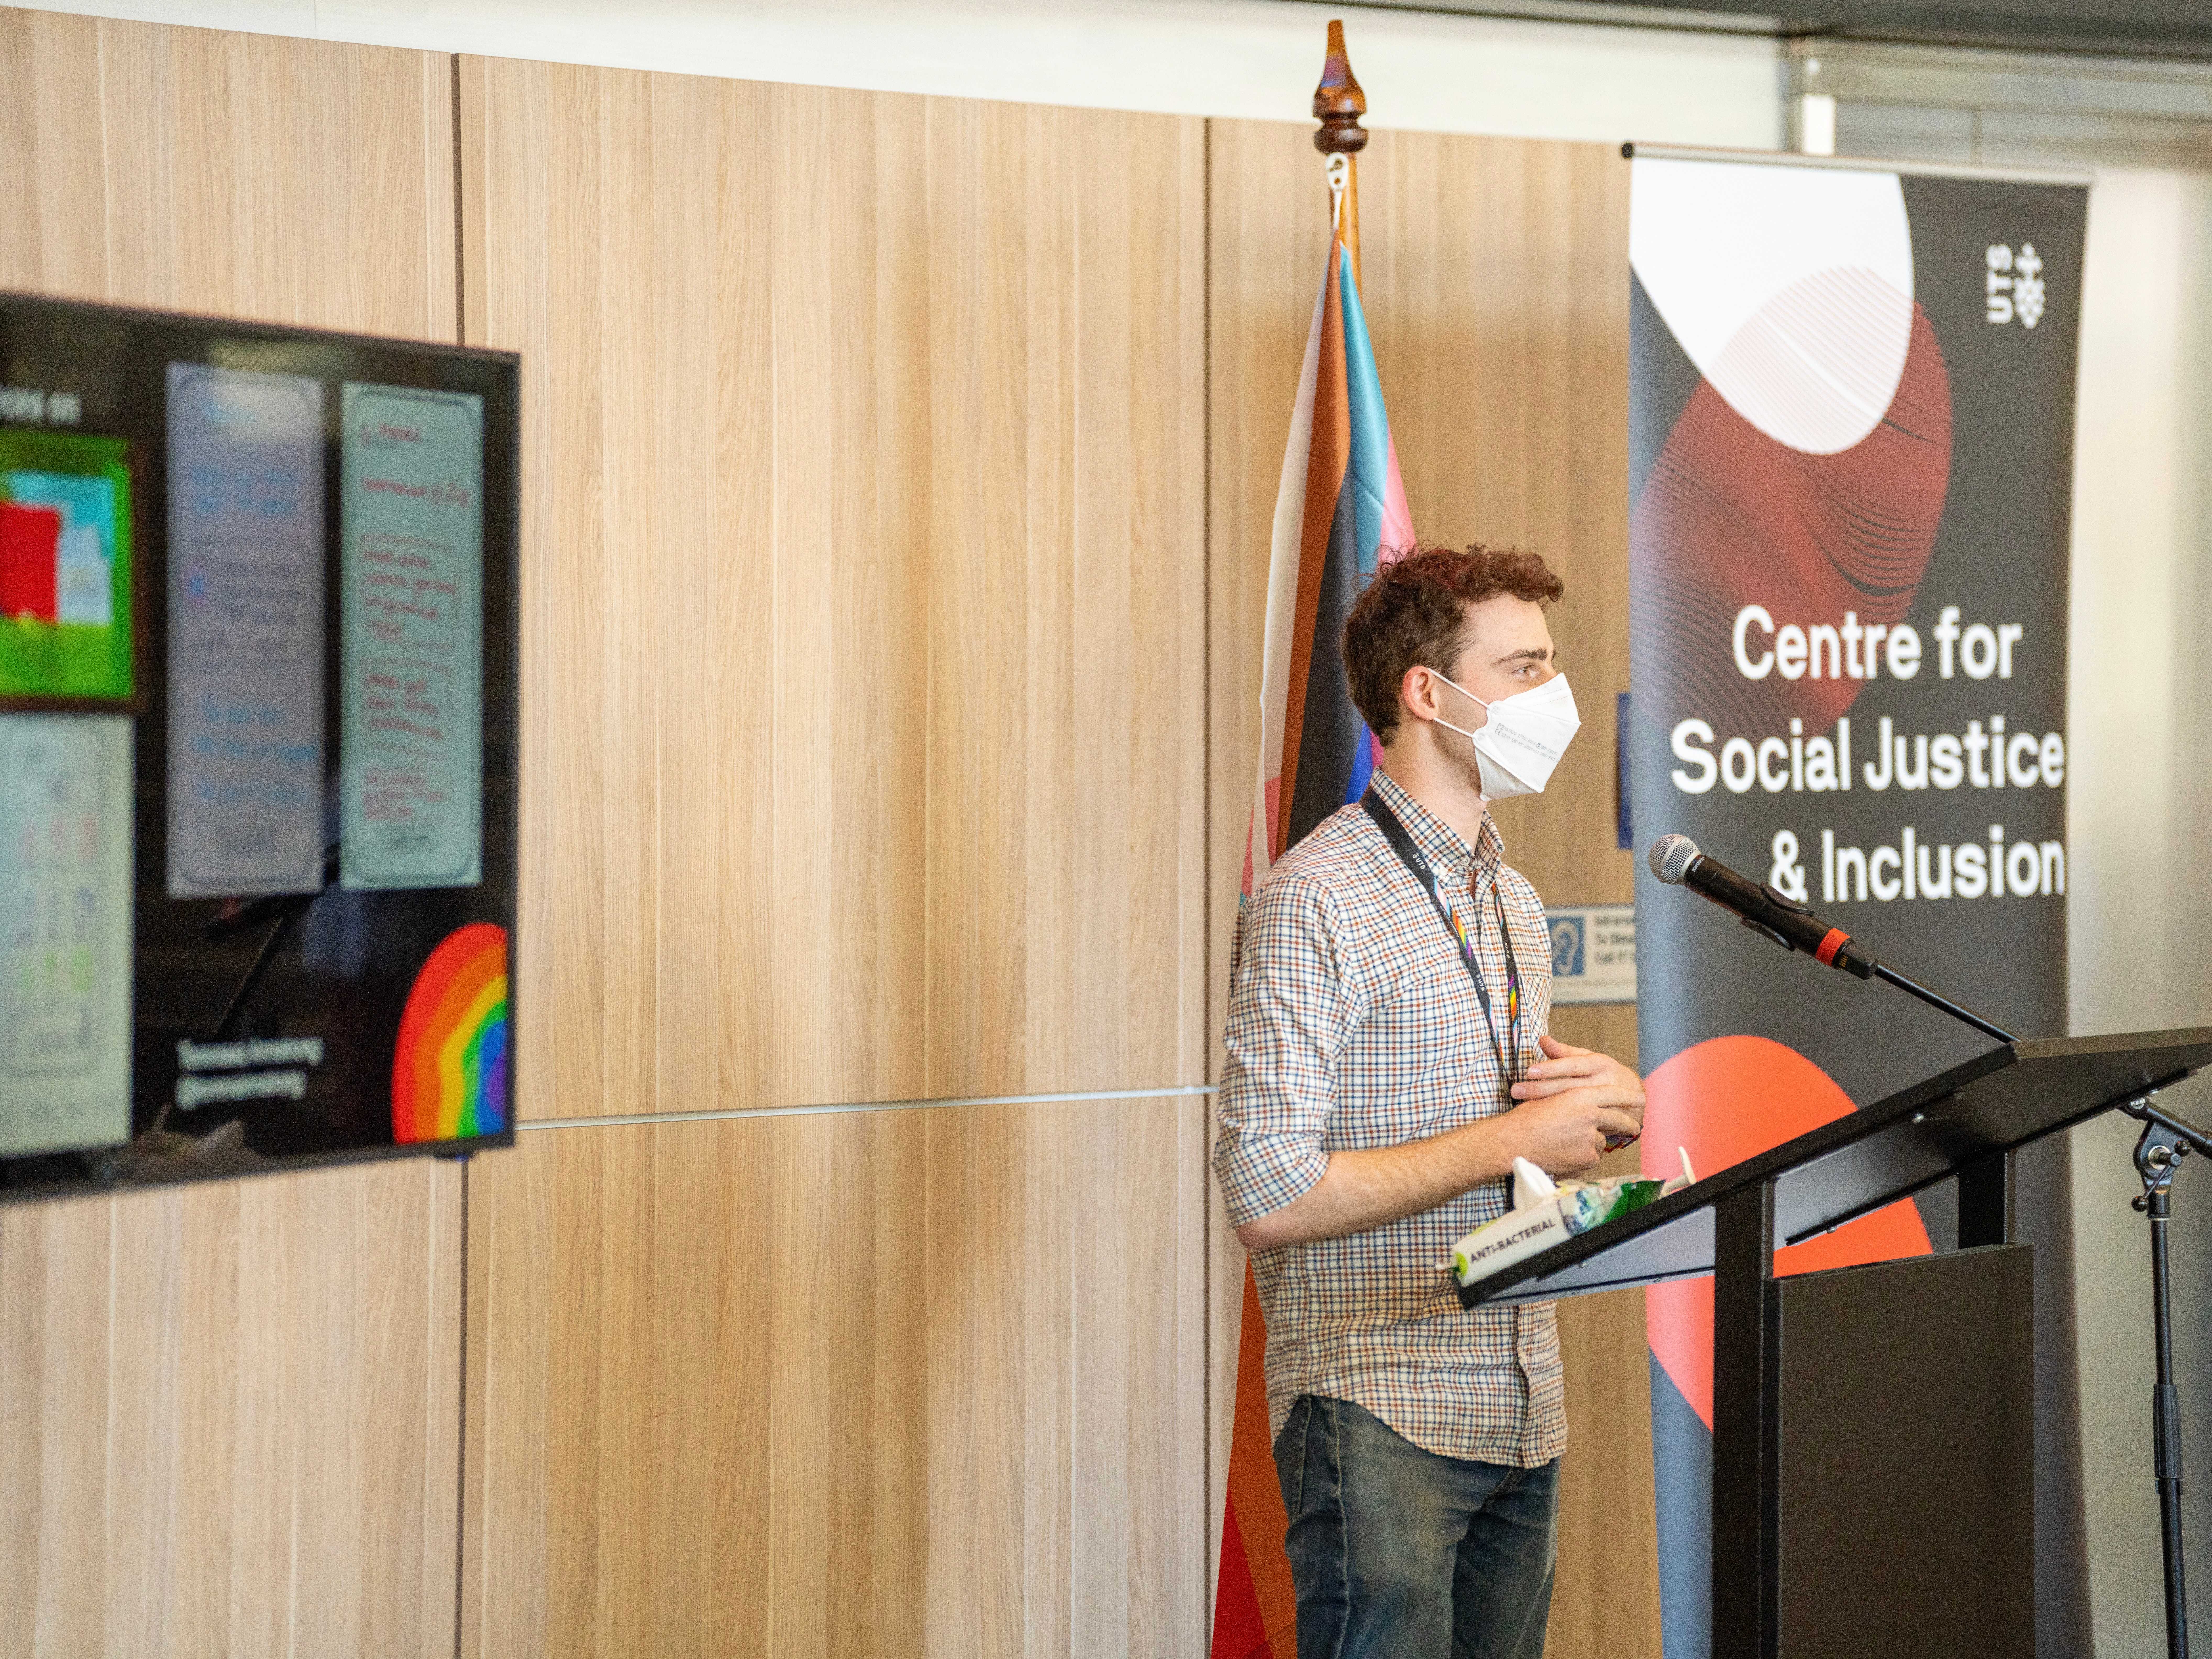 Me standing at a lectern presenting my work. Behind is a banner for the UTS Centre for Social Justice & Inclusion.